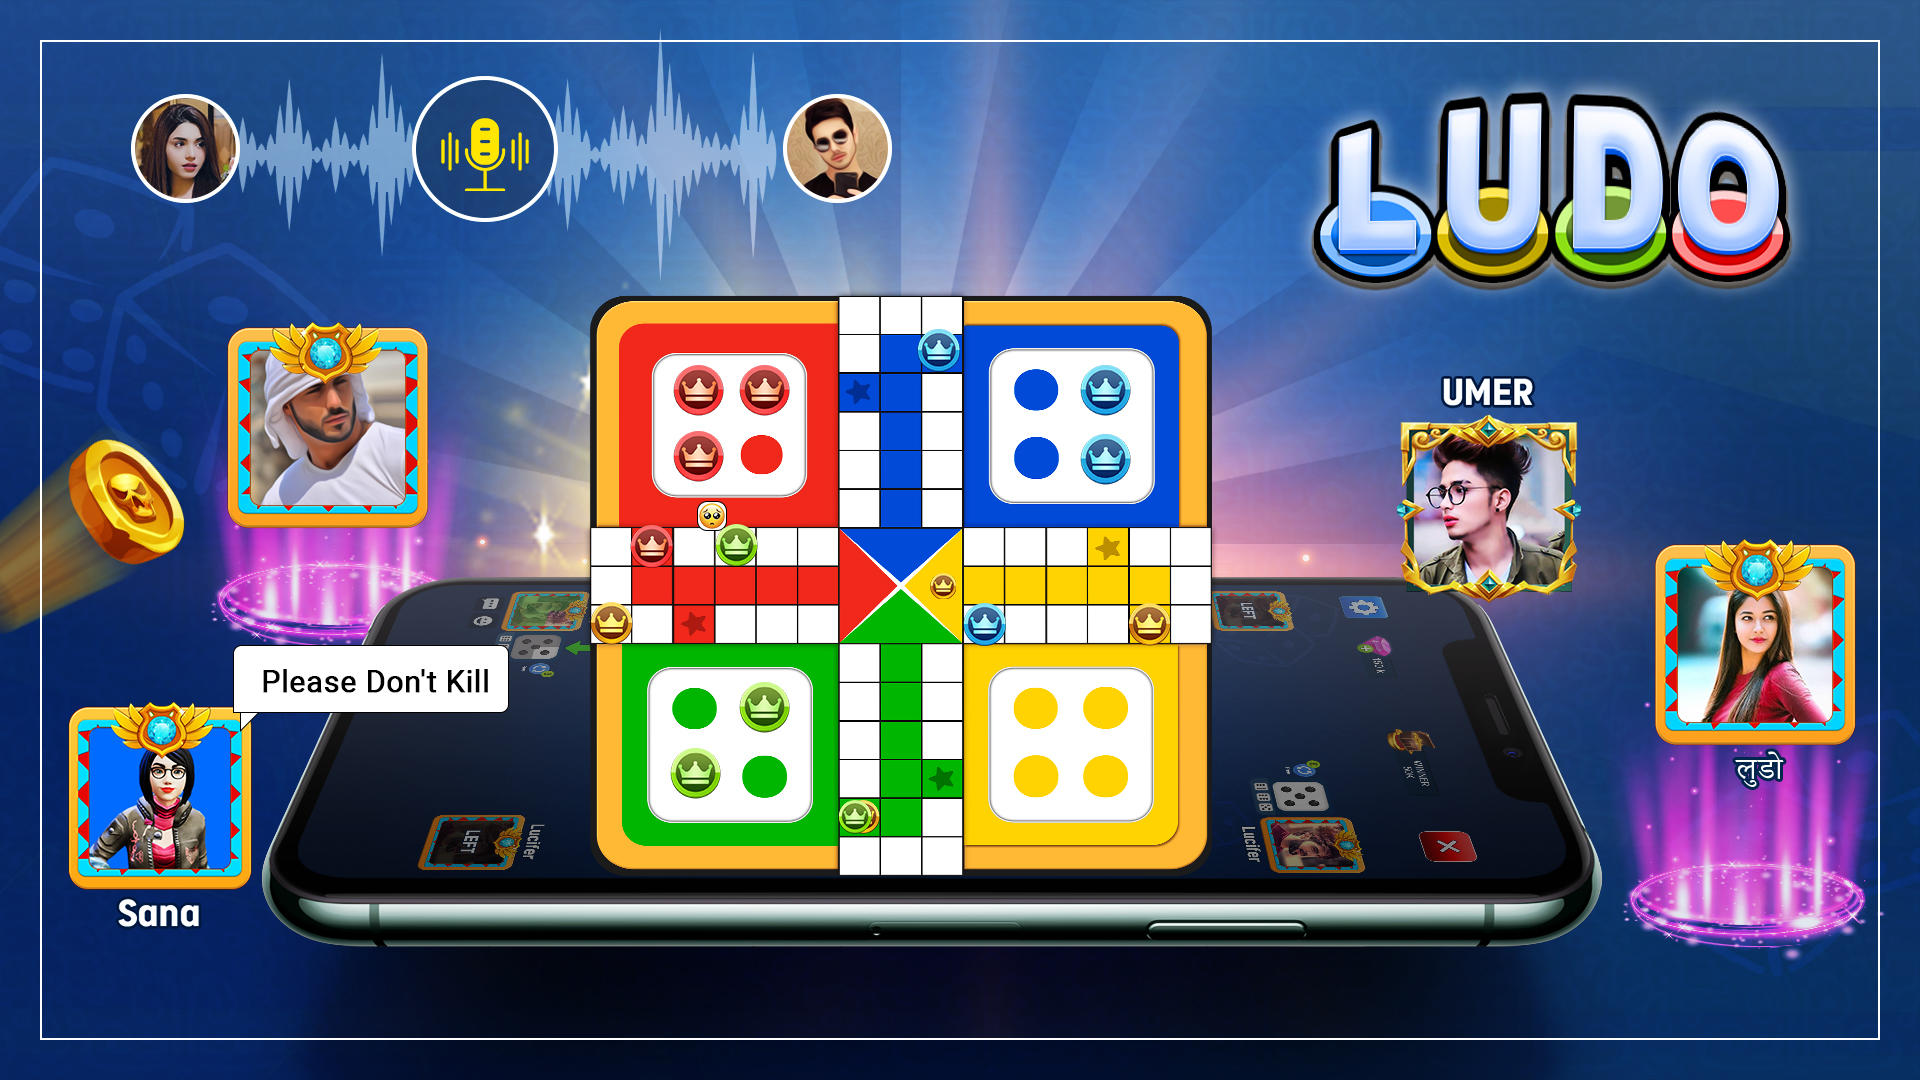 Ludo Club APK Download for Android Free